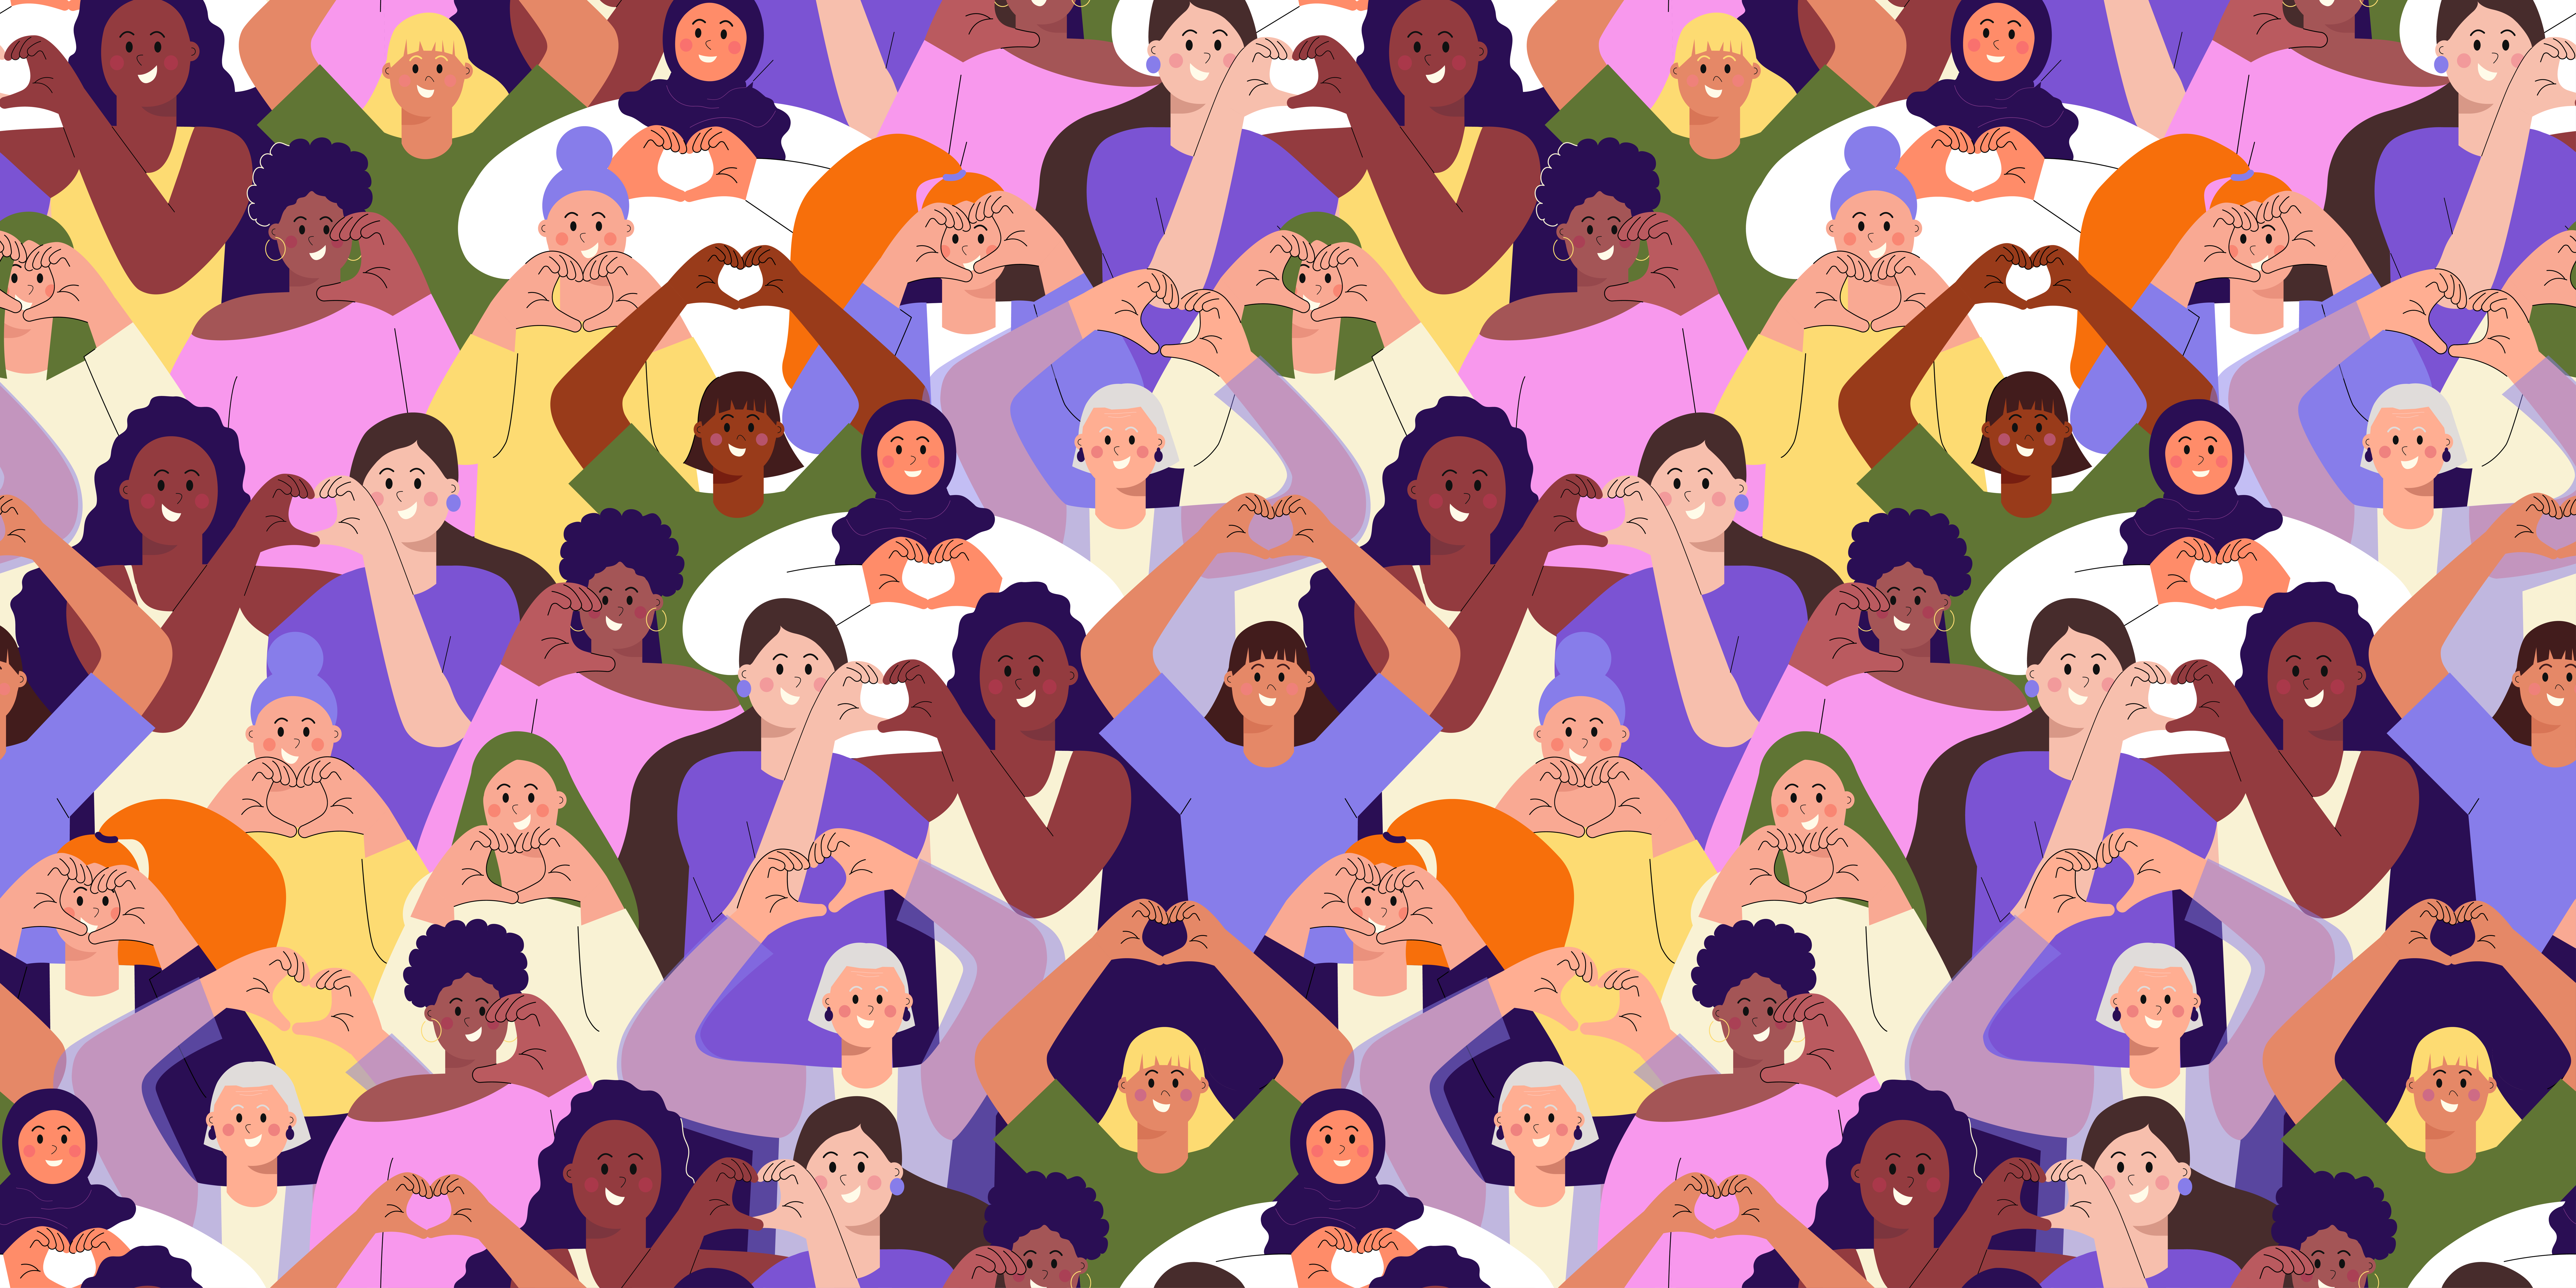 Large crowd of illustrated women all making a heart gesture for International Women's day.